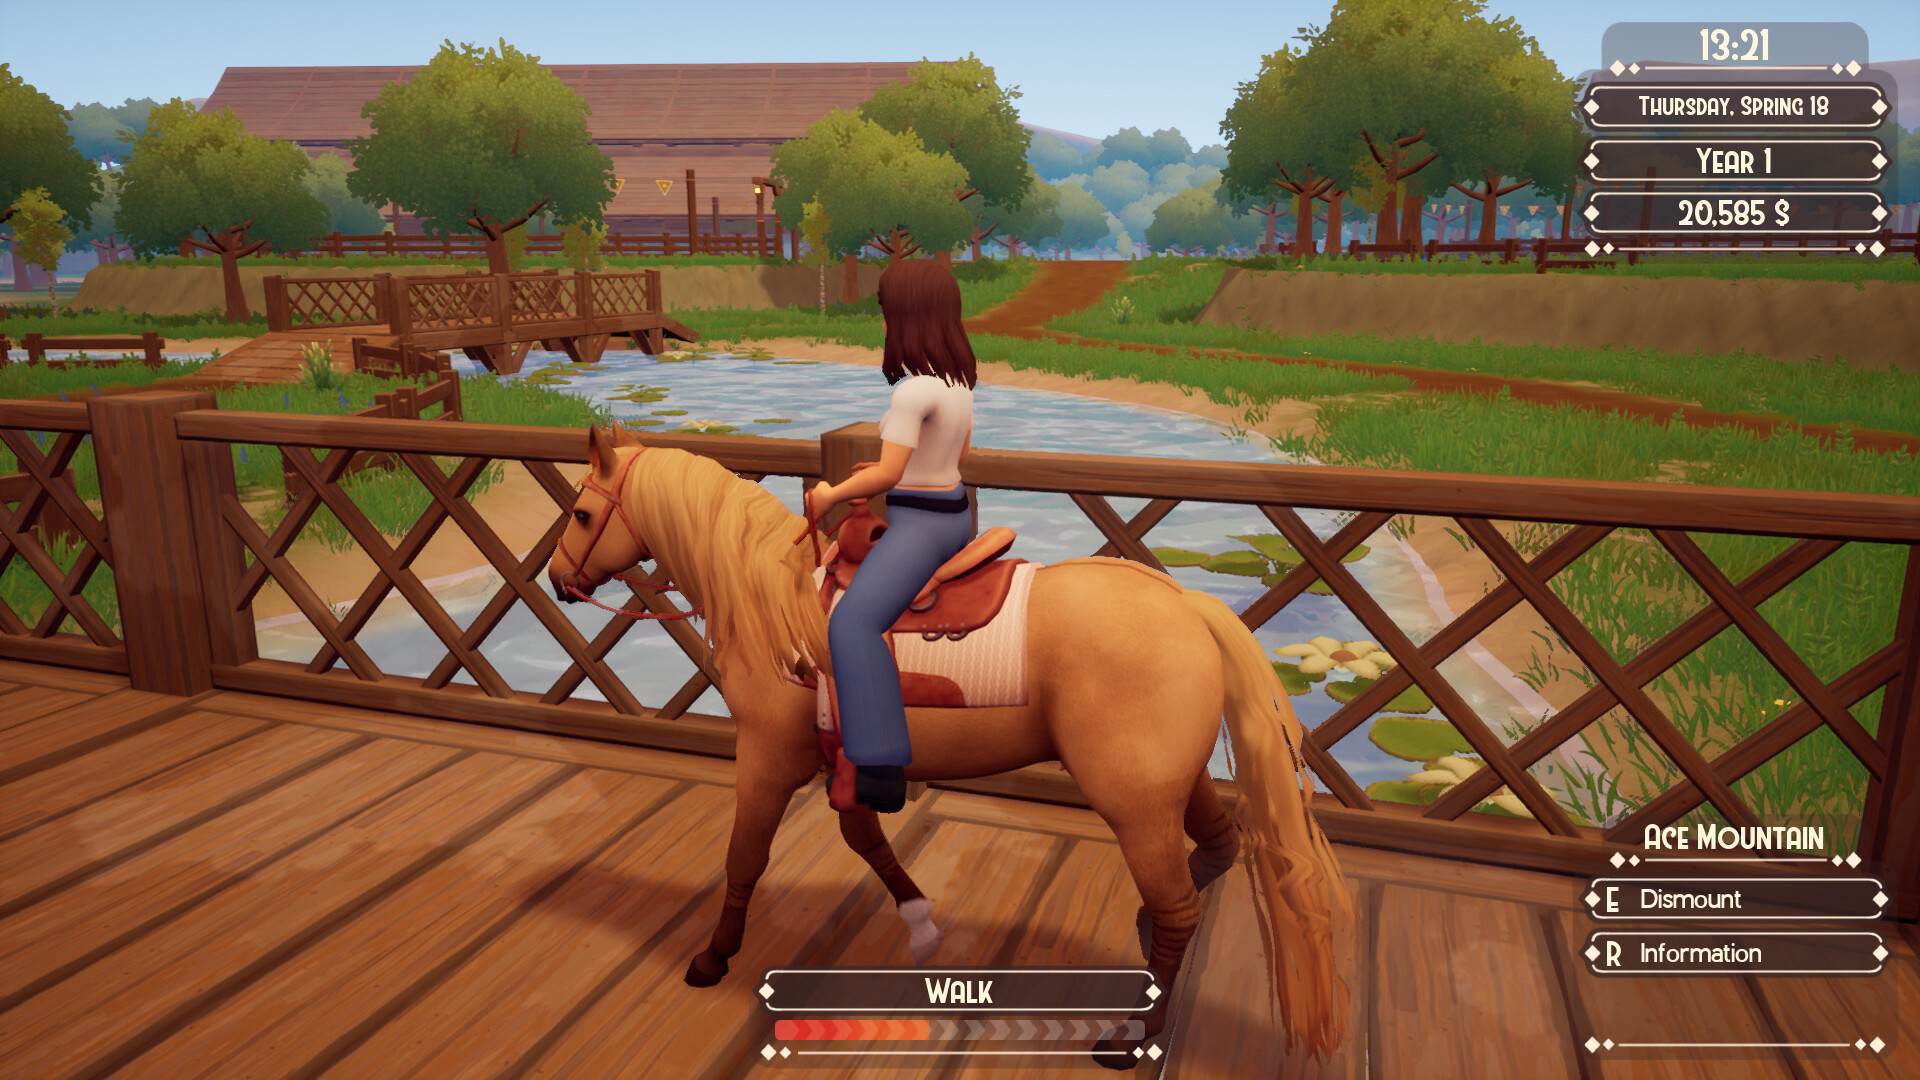 Horse Riding not compatible with Work Camera Mod : r/farmingsimulator